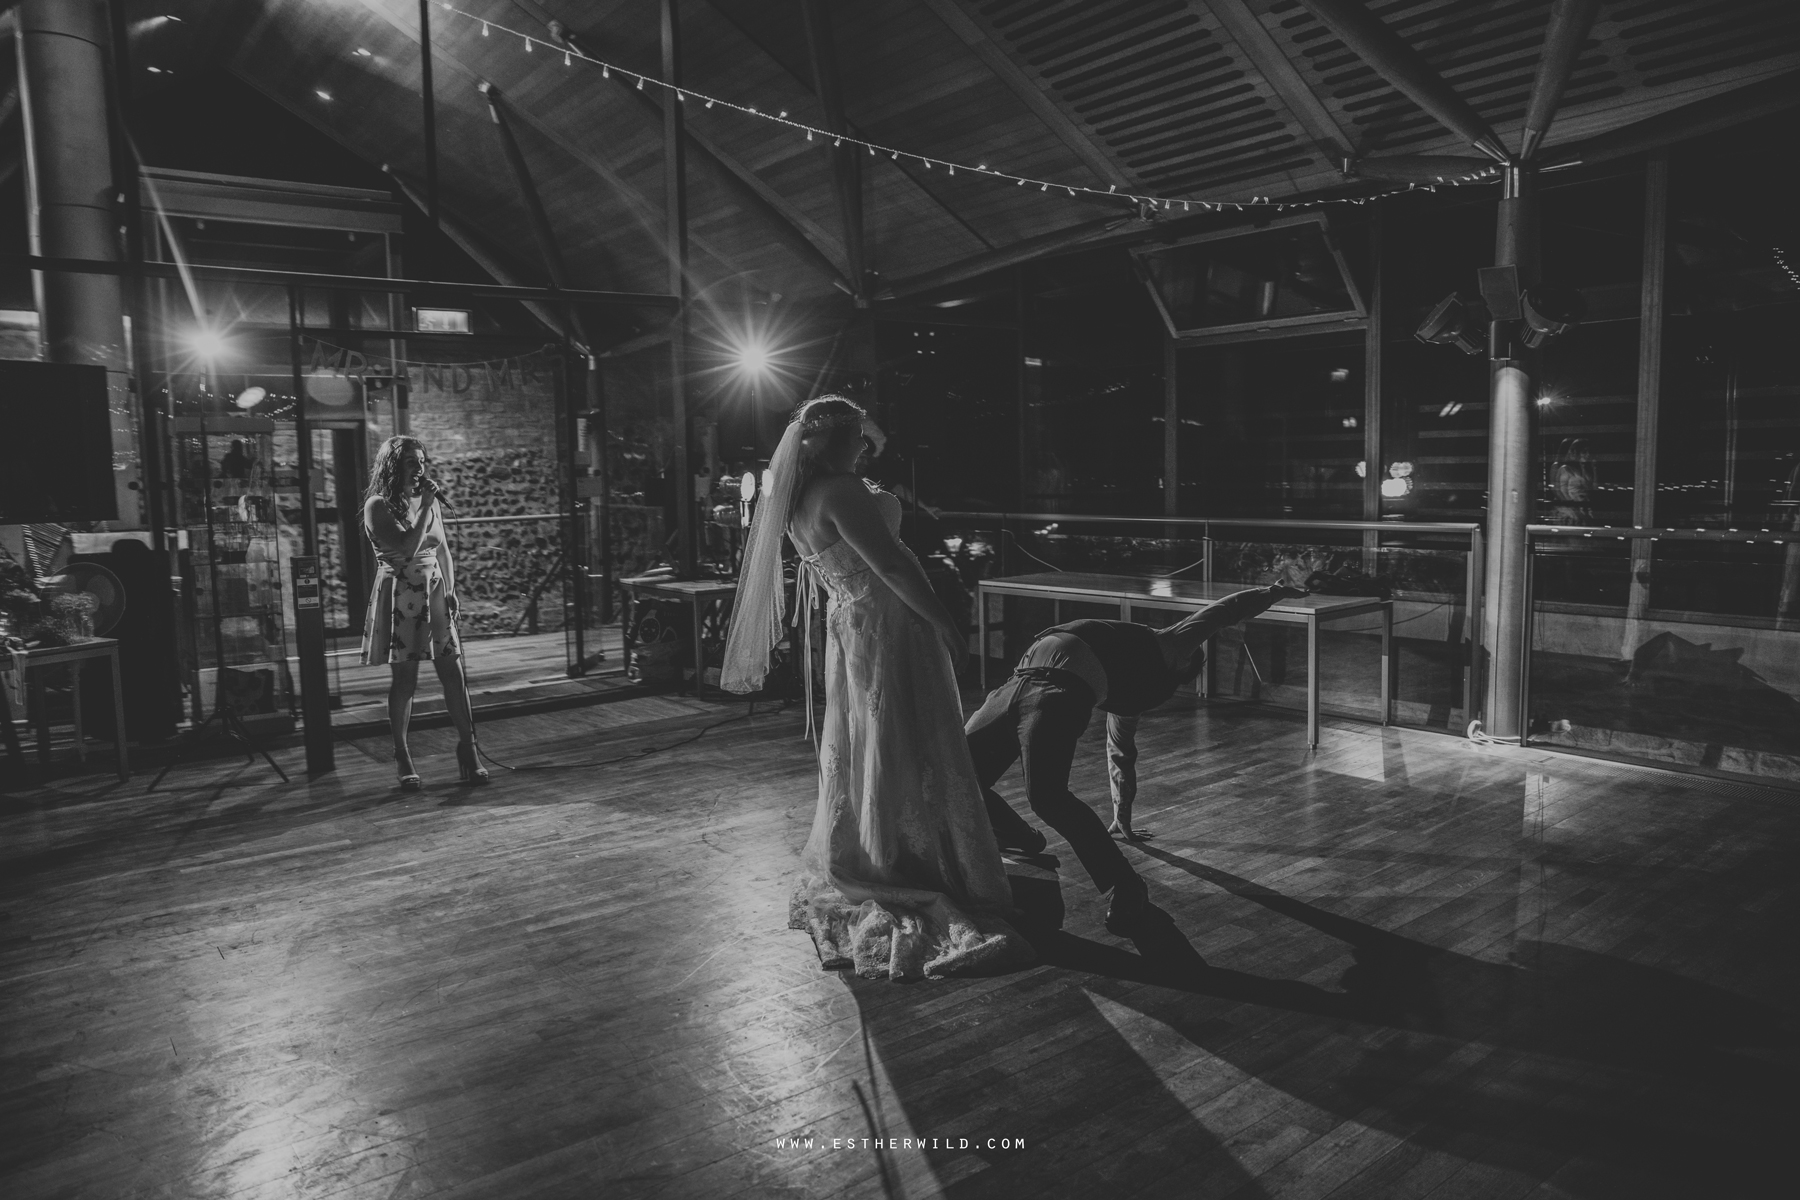 Norwich_Castle_Arcade_Grosvenor_Chip_Birdcage_Cathedral_Cloisters_Refectory_Wedding_Photography_Esther_Wild_Photographer_Norfolk_Kings_Lynn_3R8A3248-2.jpg